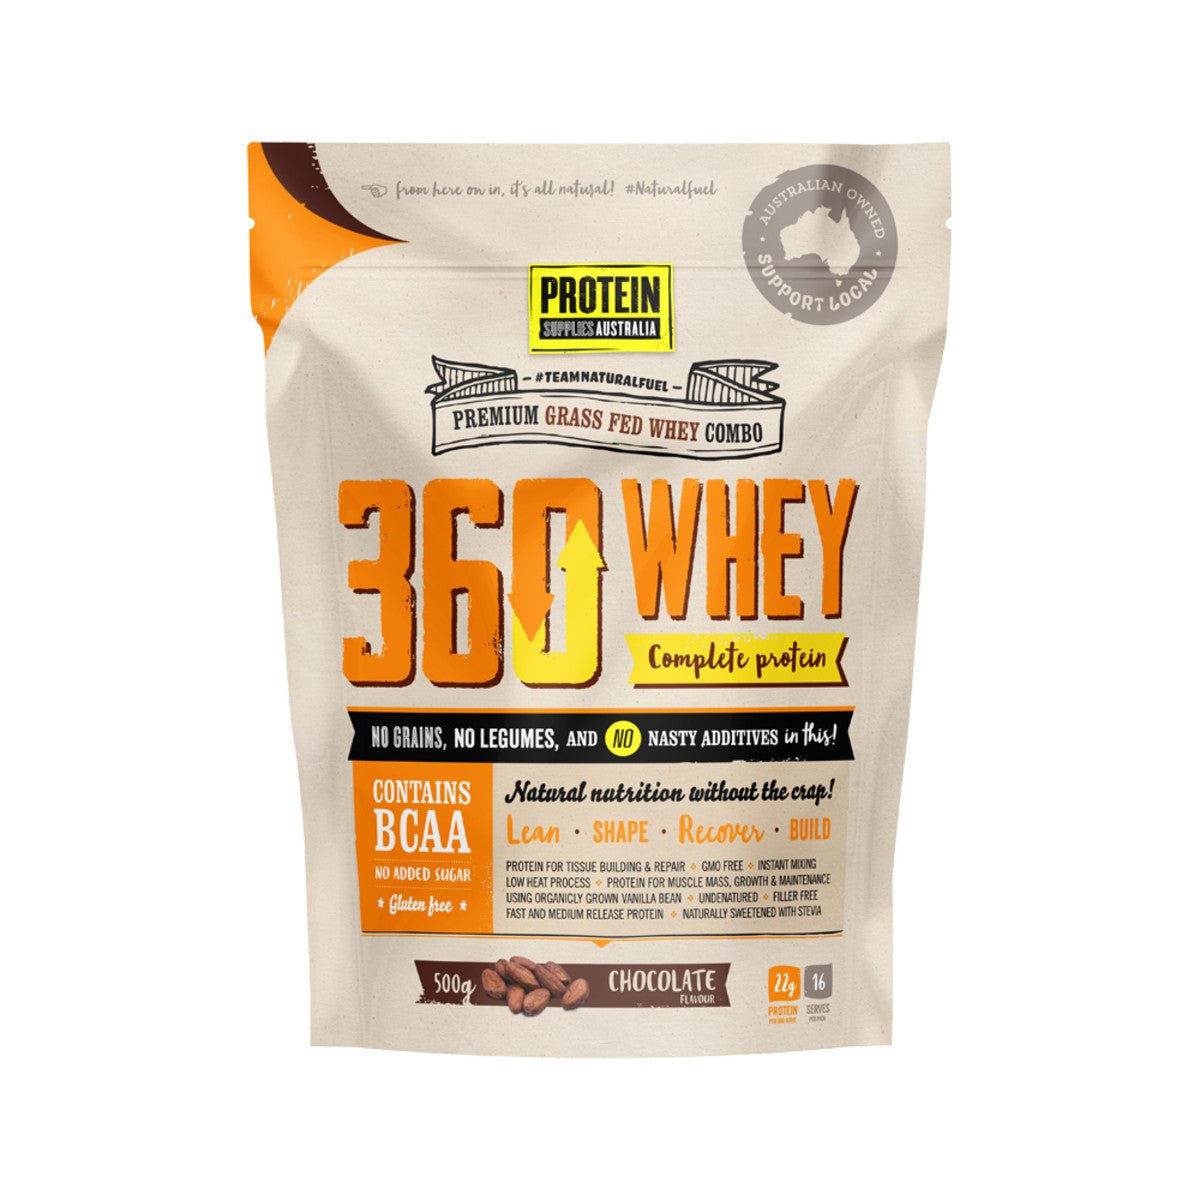 360 Whey Complete Protein with BCAA - Chocolate - 500g - Yo Keto